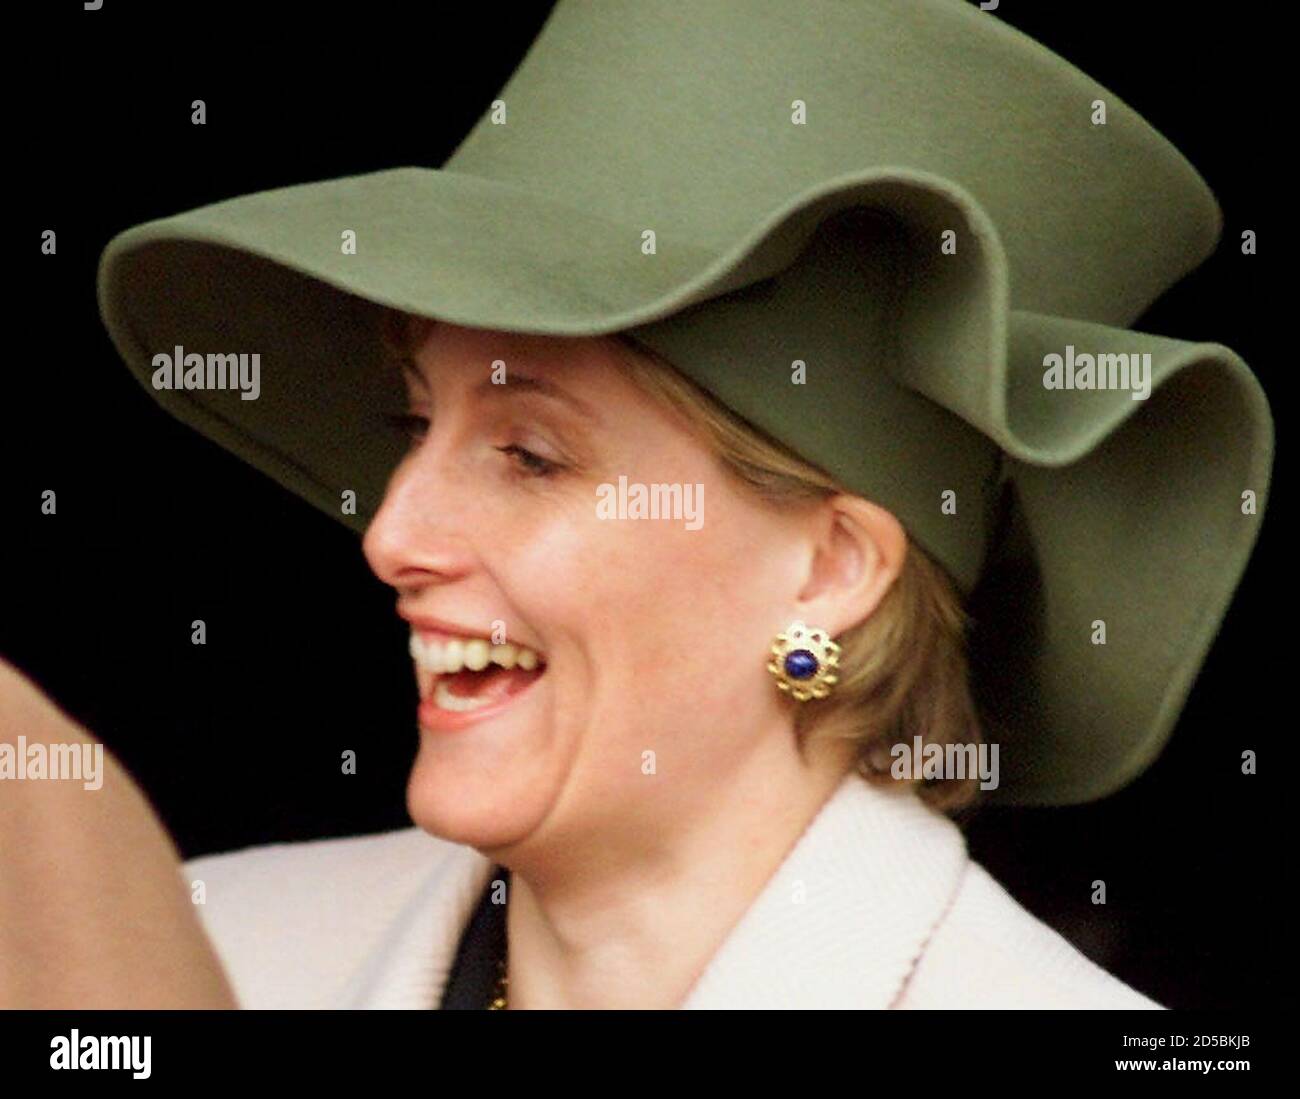 sophie-the-countess-of-wessex-wearing-an-unusual-hat-laughs-as-she-leaves-church-following-the-christmas-morning-service-at-sandringham-december-25-sophie-together-with-her-husband-prince-edward-joined-the-rest-of-the-royal-family-for-the-traditional-service-at-saint-mary-magdalene-church-although-prince-william-did-not-attend-the-service-2d5bkjb.jpg